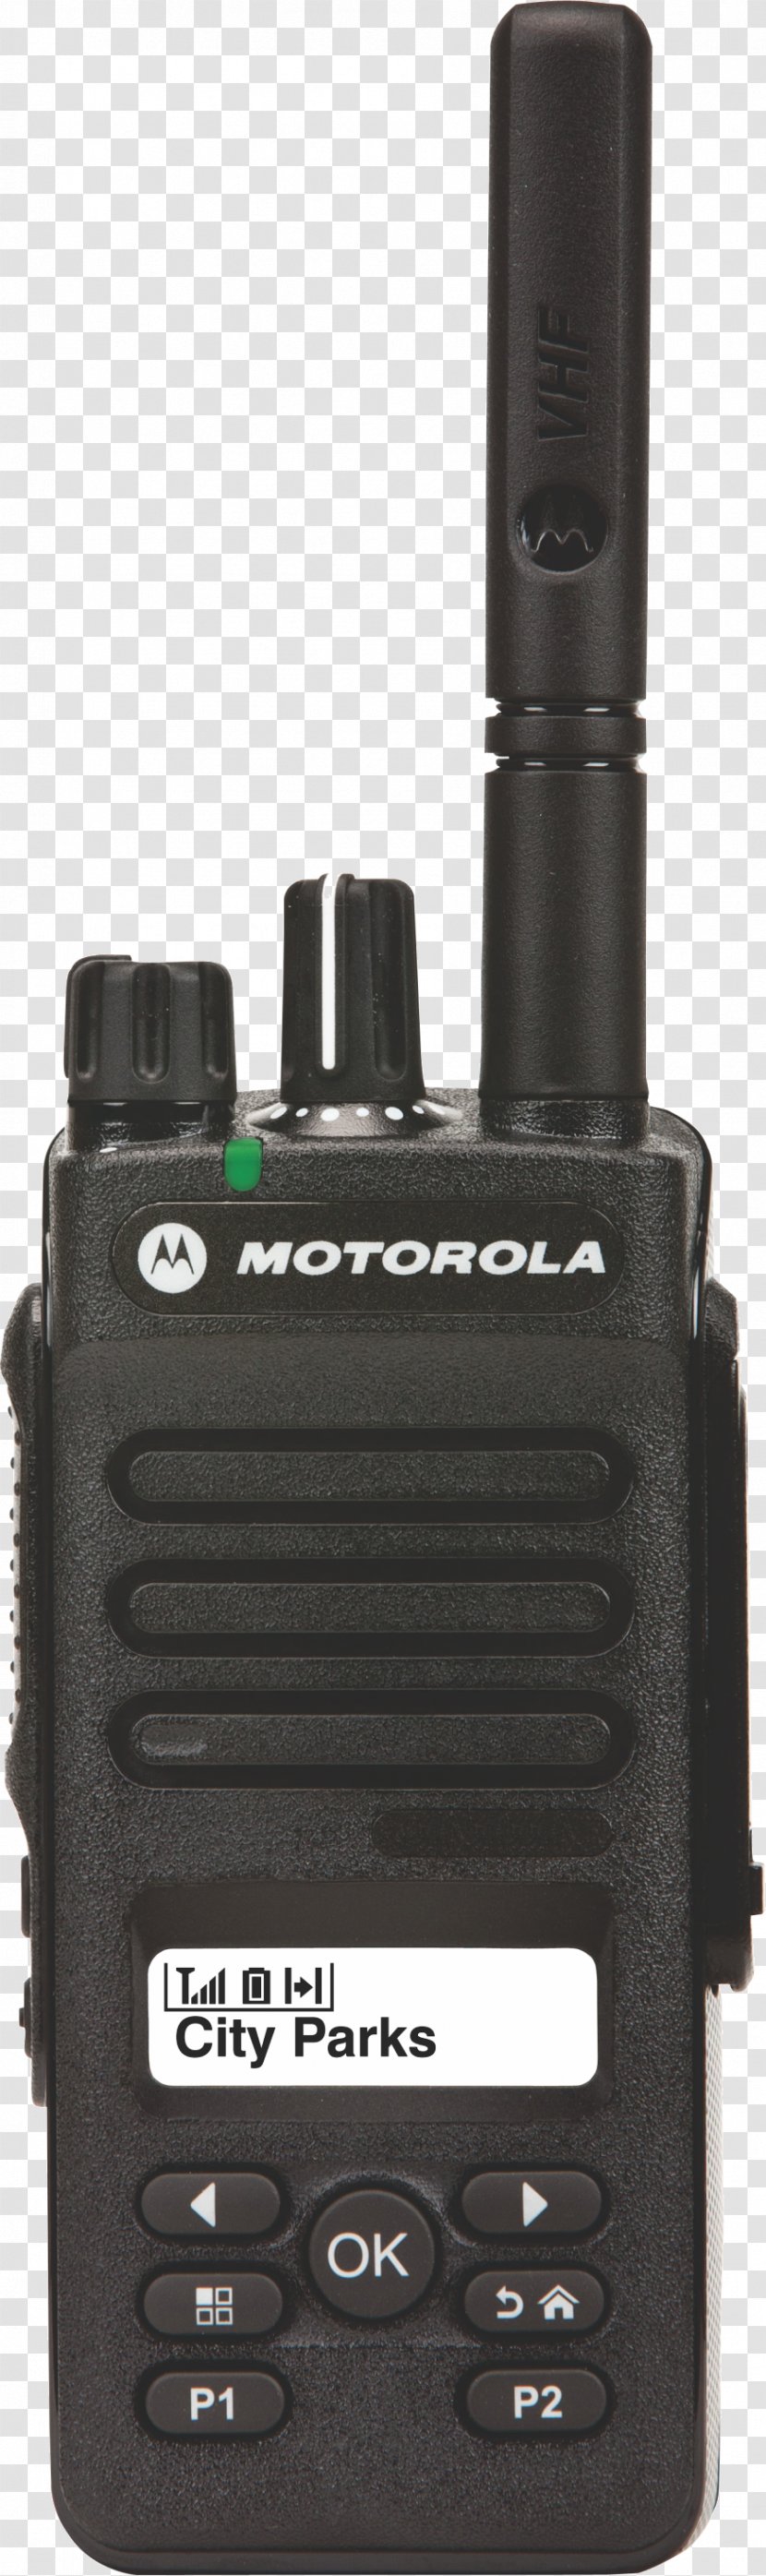 Two-way Radio Motorola Solutions Very High Frequency Mobile Phones - Wireless Transparent PNG